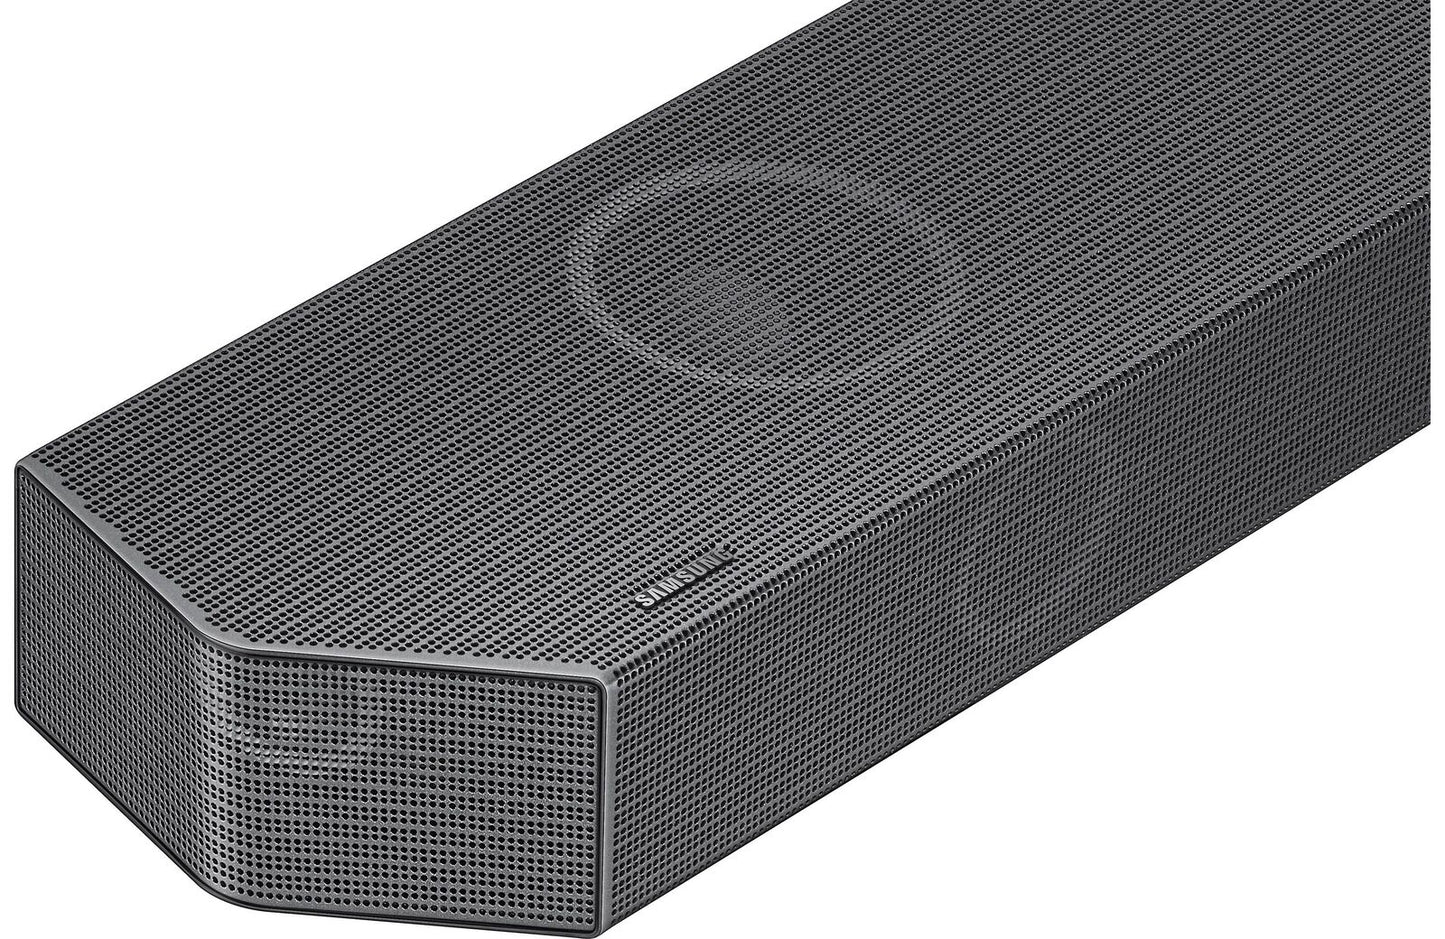 Samsung HW-Q800B Powered 5.1.2-channel sound bar and wireless subwoofer system w